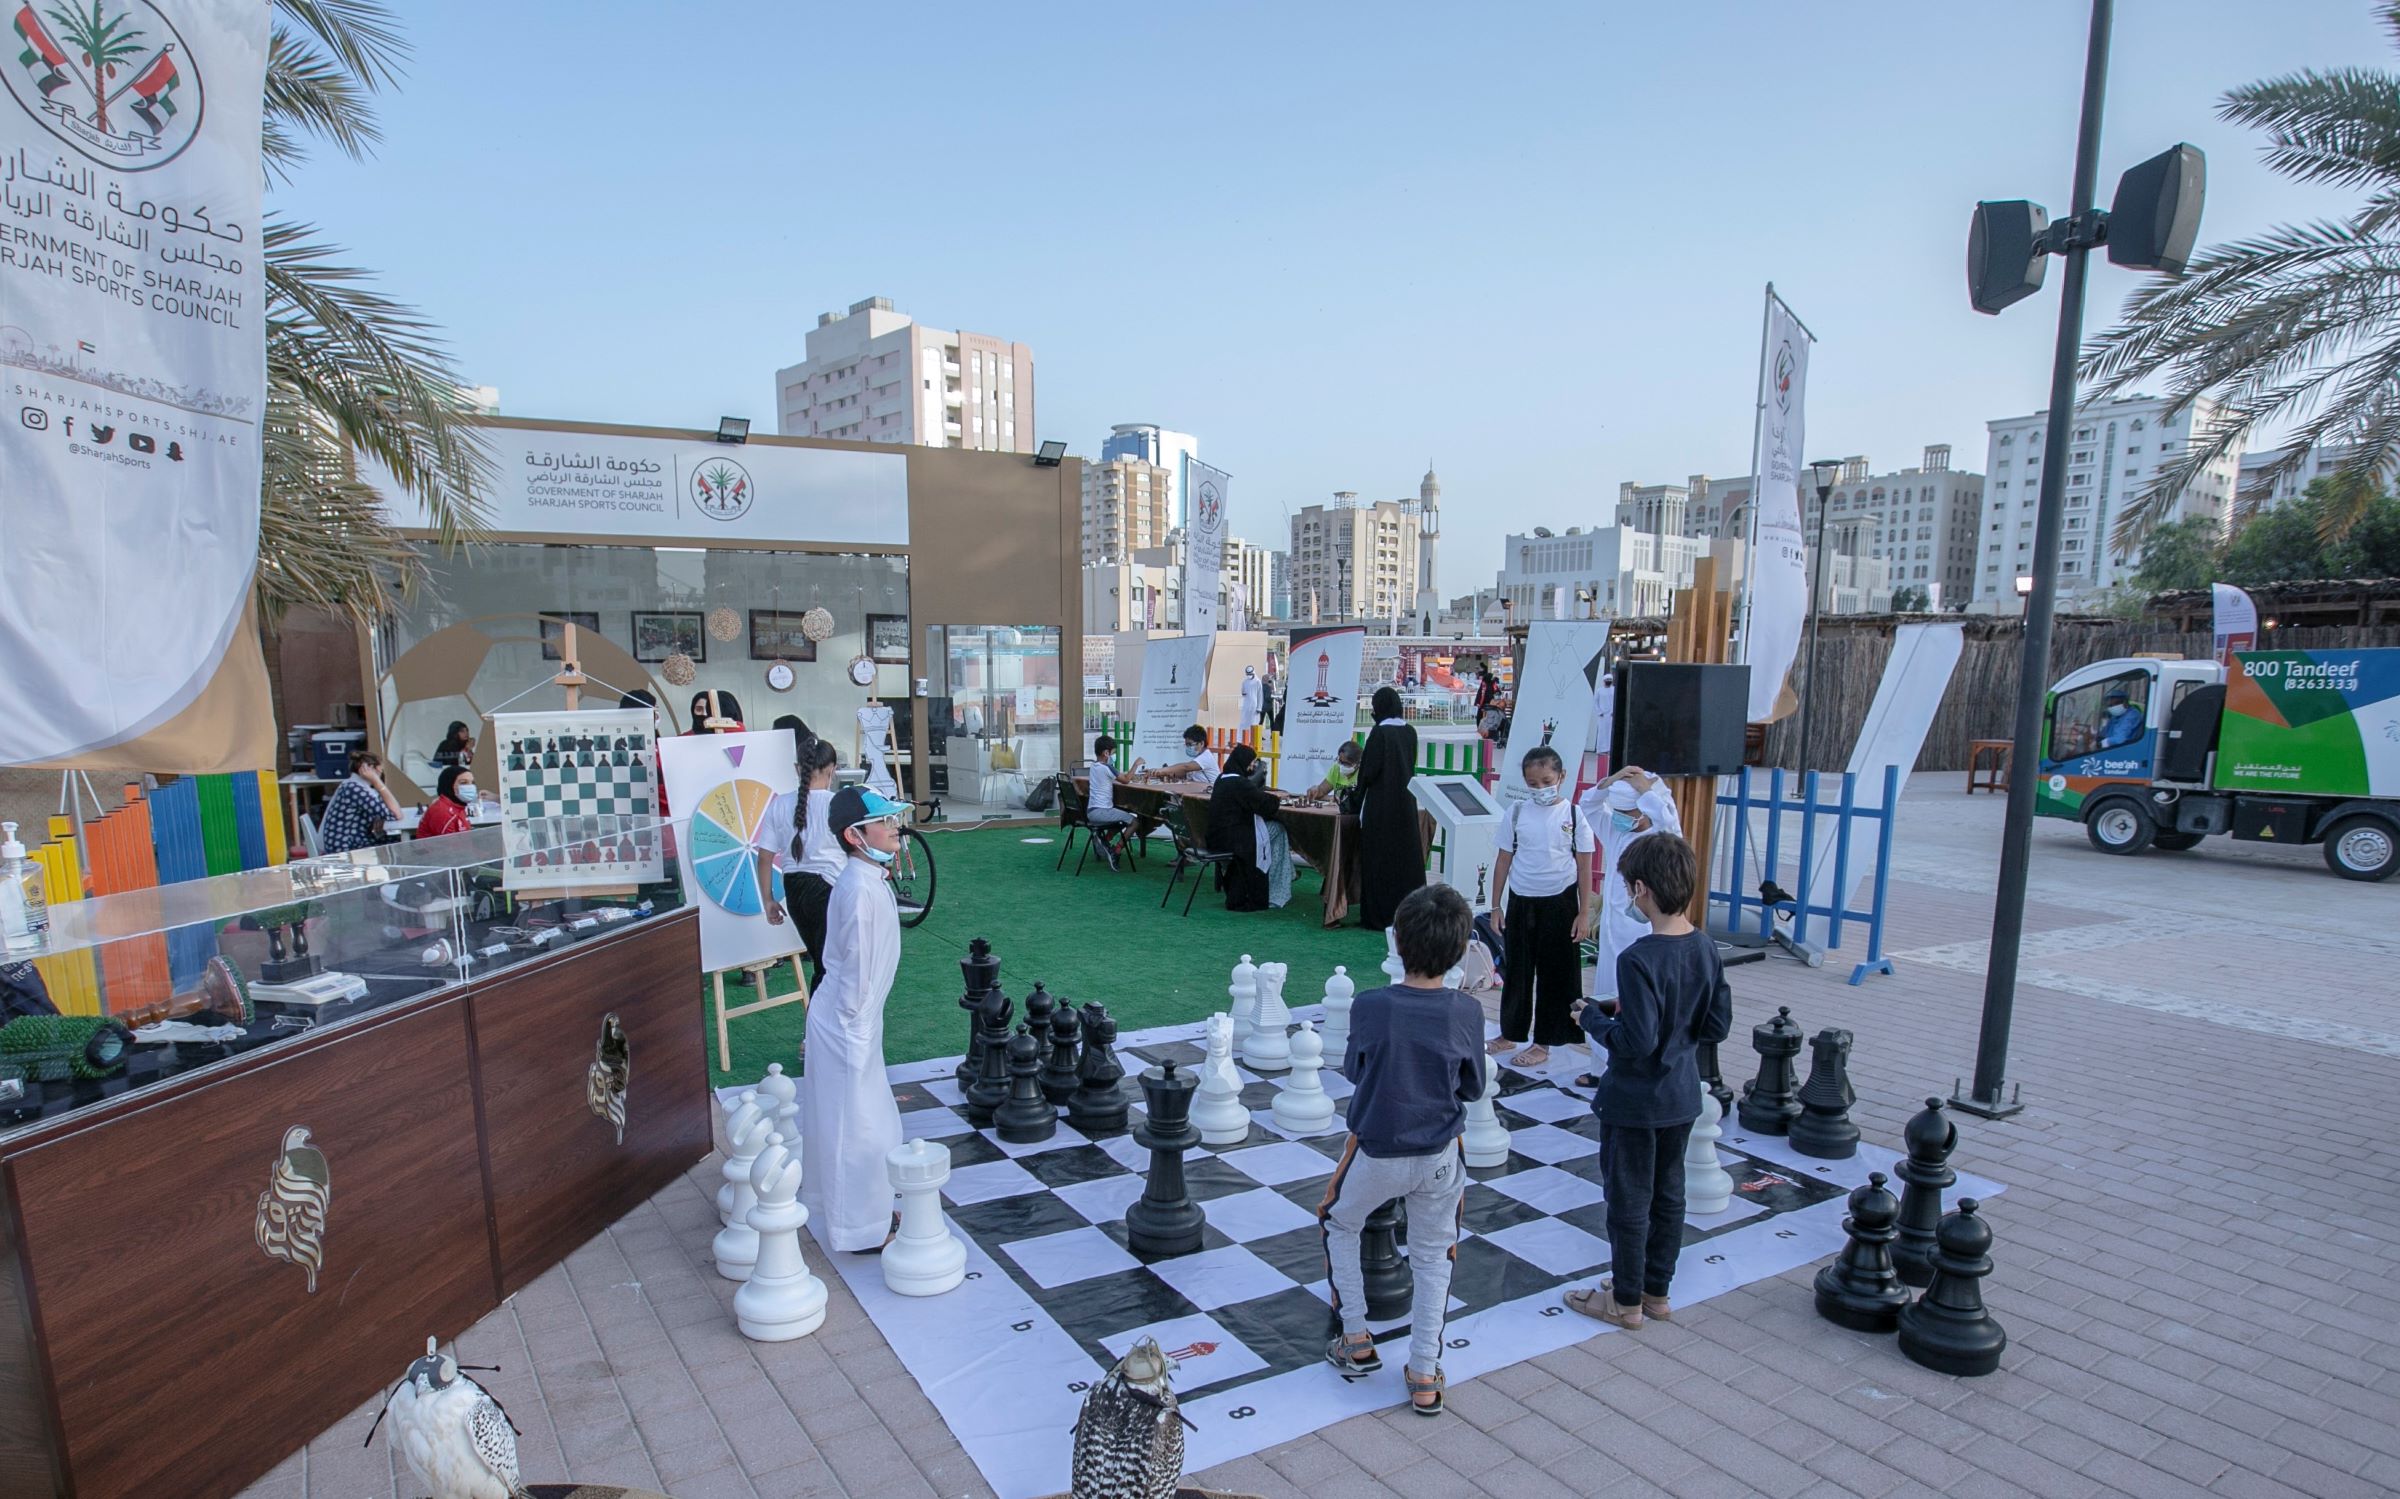 Making The Right Moves In A Game Of Giant Outdoor Chess At Sharjah